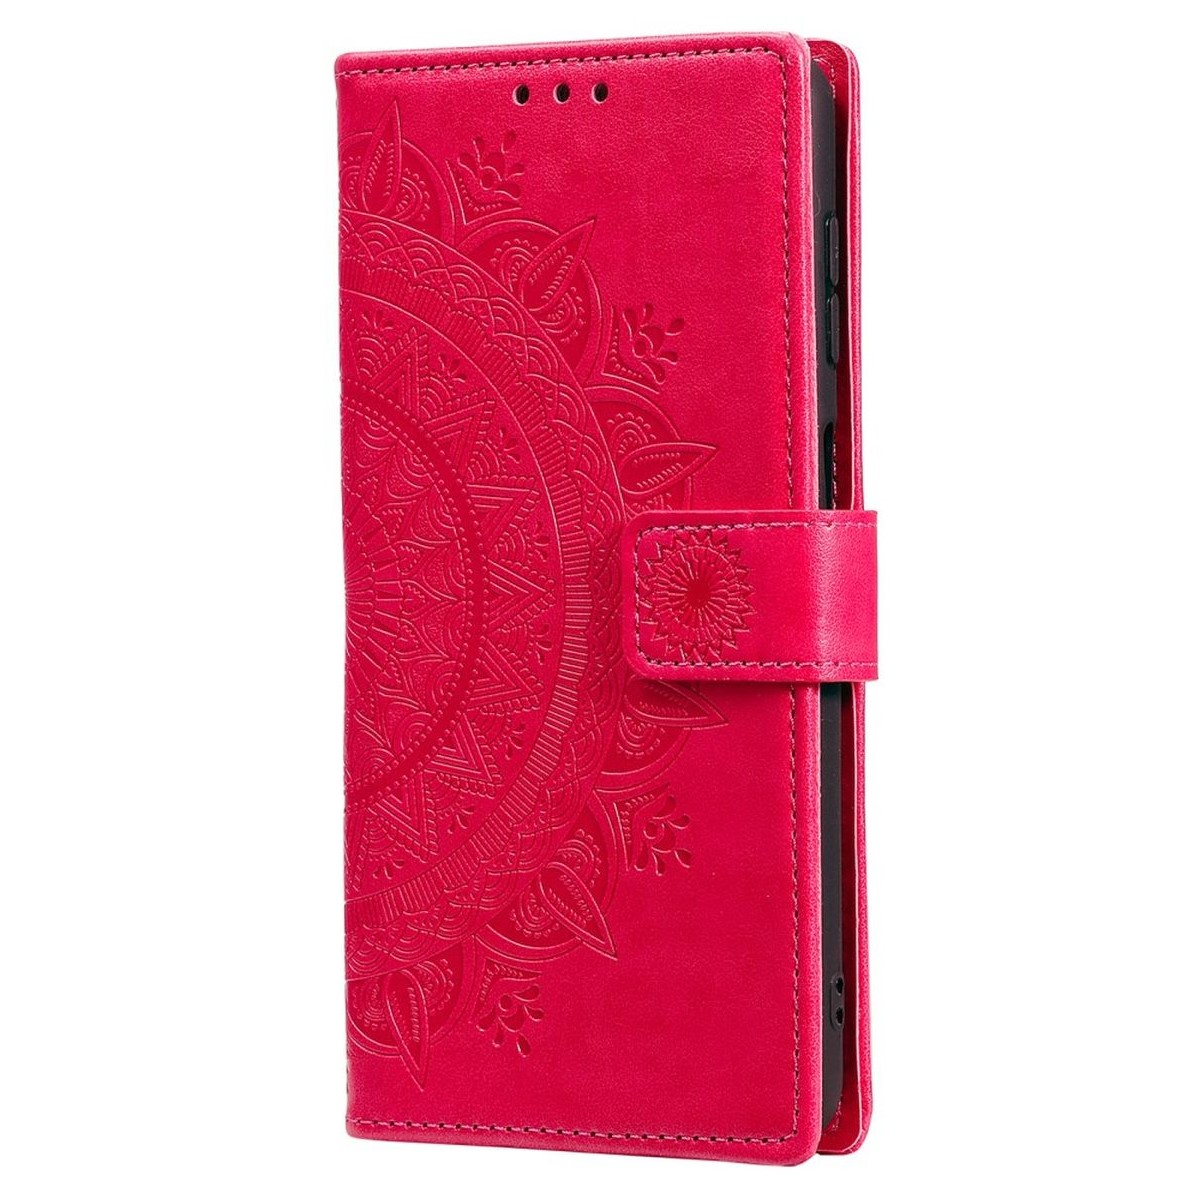 COVERKINGZ Klapphülle mit Mandala Muster, Galaxy Pink Samsung, Bookcover, S22 Ultra